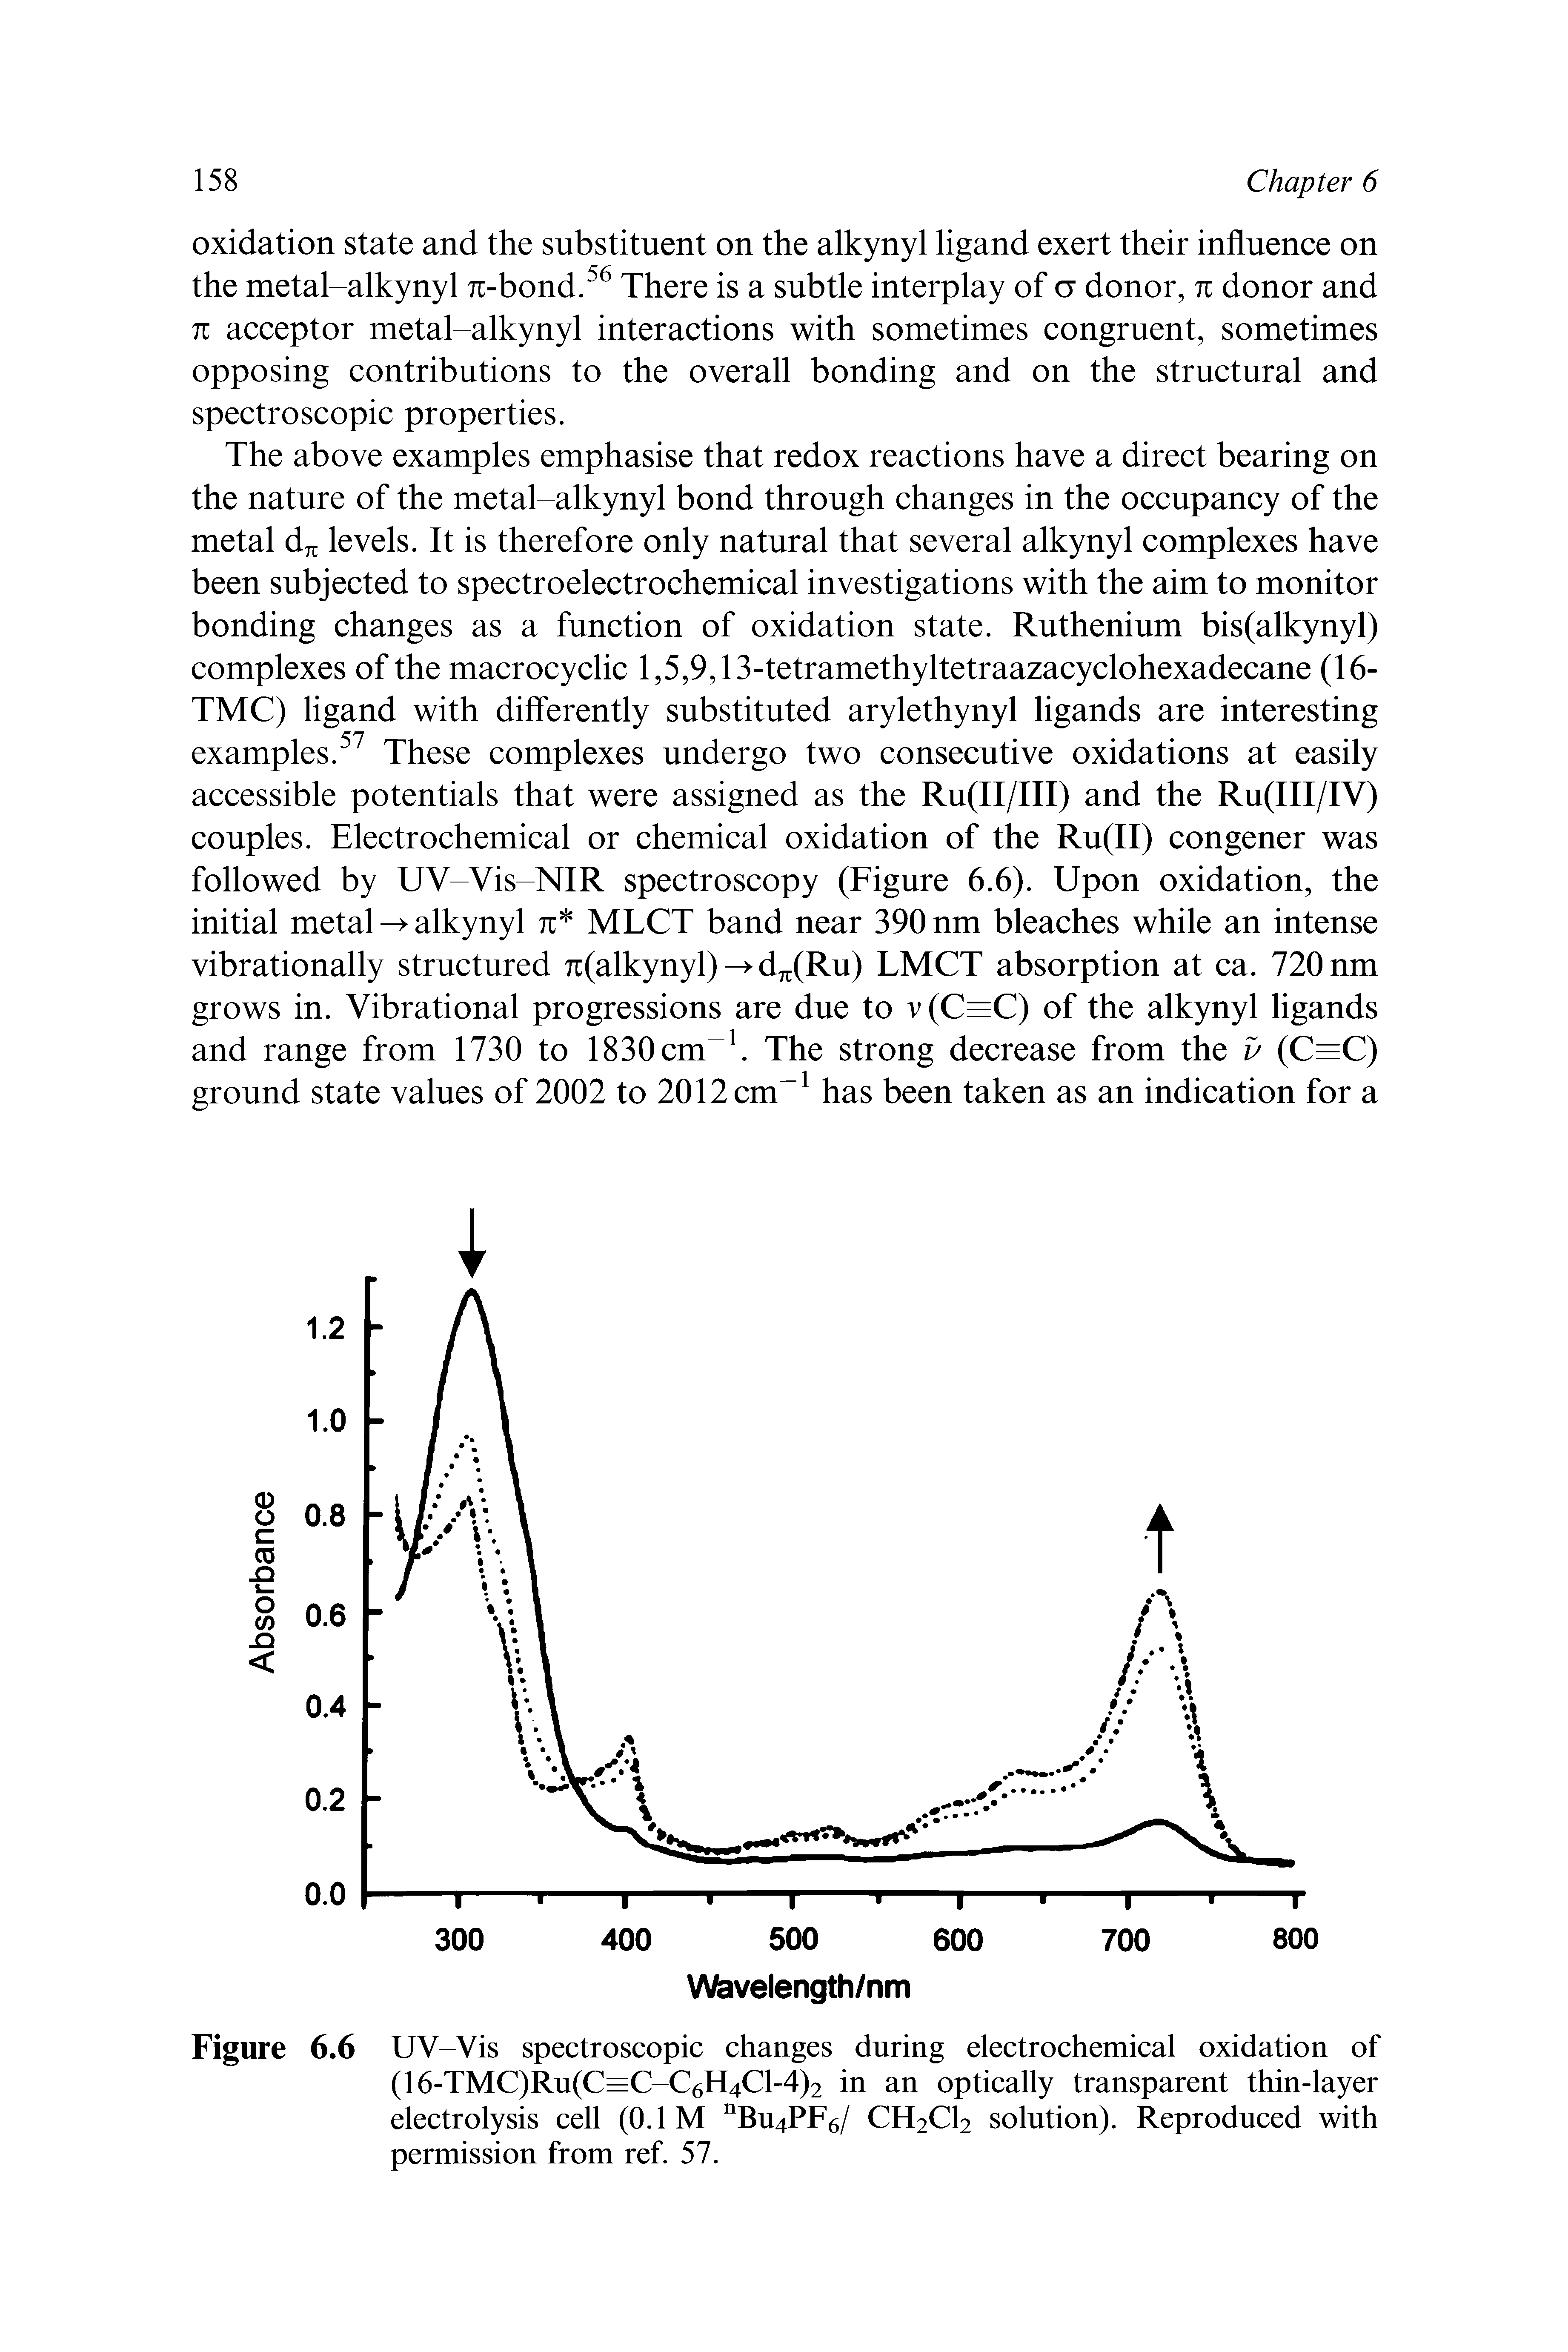 Figure 6.6 UV-Vis spectroscopic changes during electrochemical oxidation of (16-TMC)Ru(C=C-C6H4C1-4)2 in an optically transparent thin-layer electrolysis cell (0.1 M Bu4PF6/ CH2CI2 solution). Reproduced with permission from ref 57.